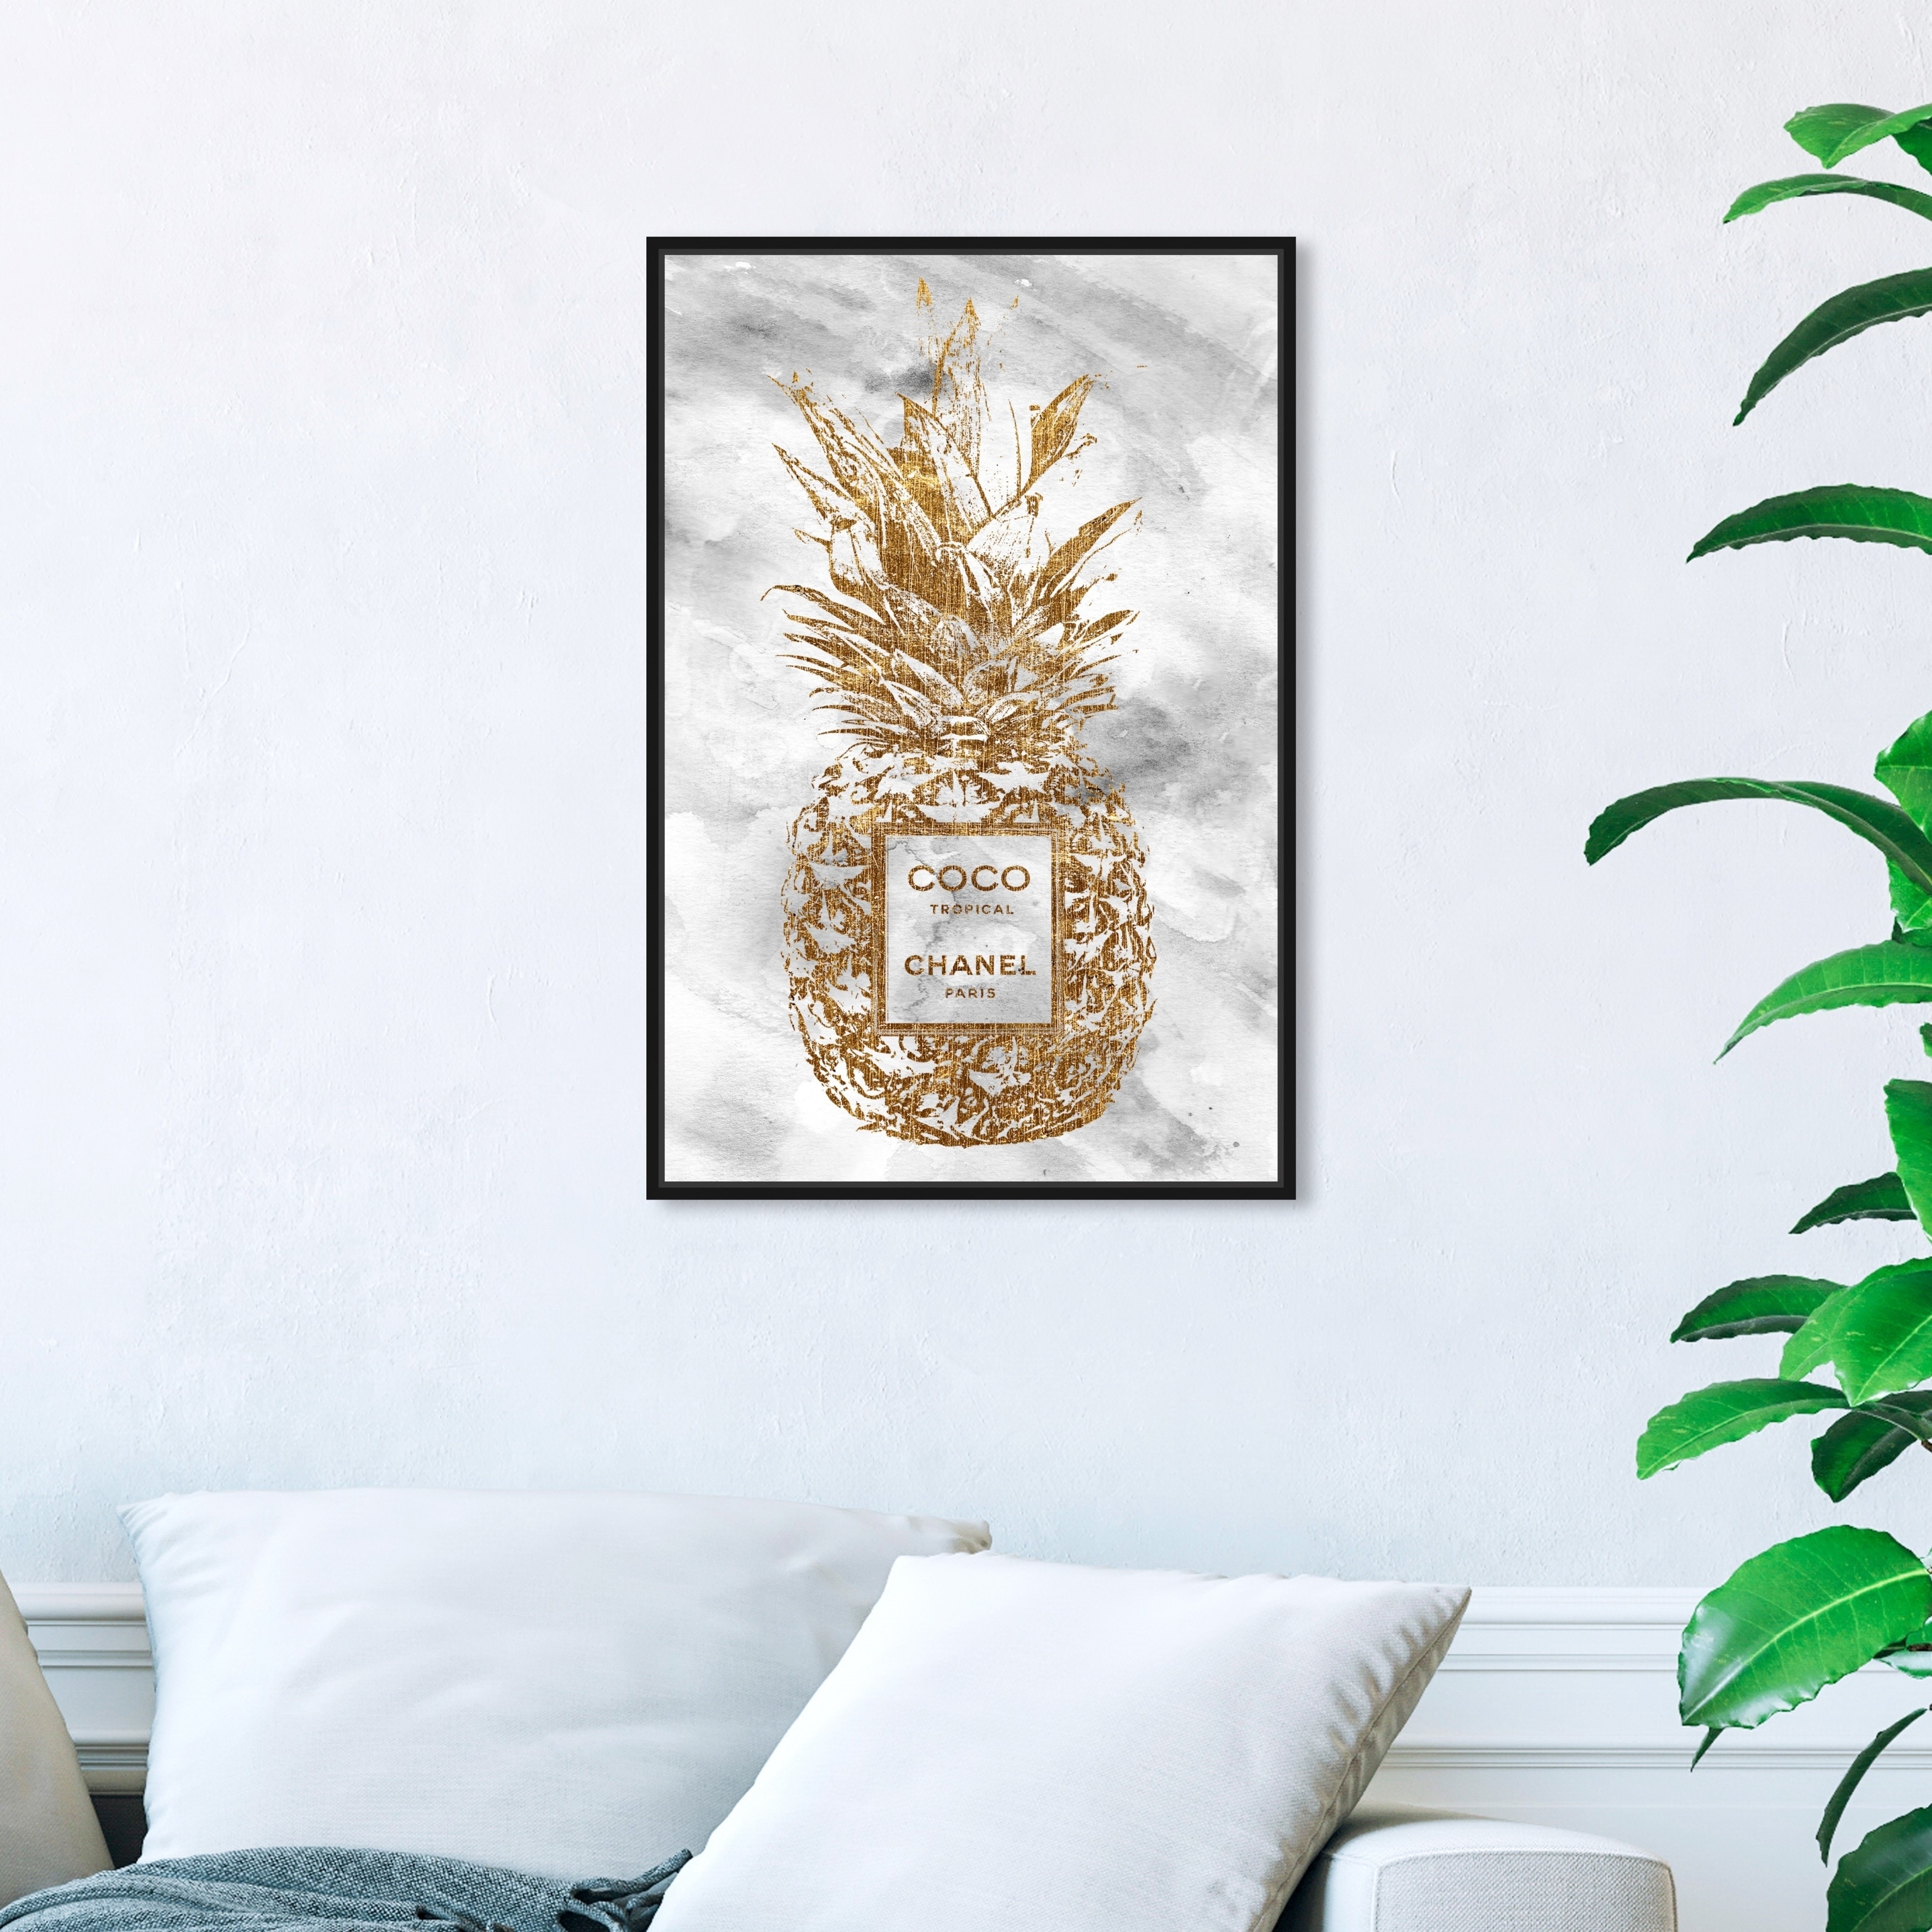 Oliver Gal 'Coco Tropical' Fashion and Glam Framed Wall Art Prints Fashion  Lifestyle - Gold, White - On Sale - Bed Bath & Beyond - 31287686